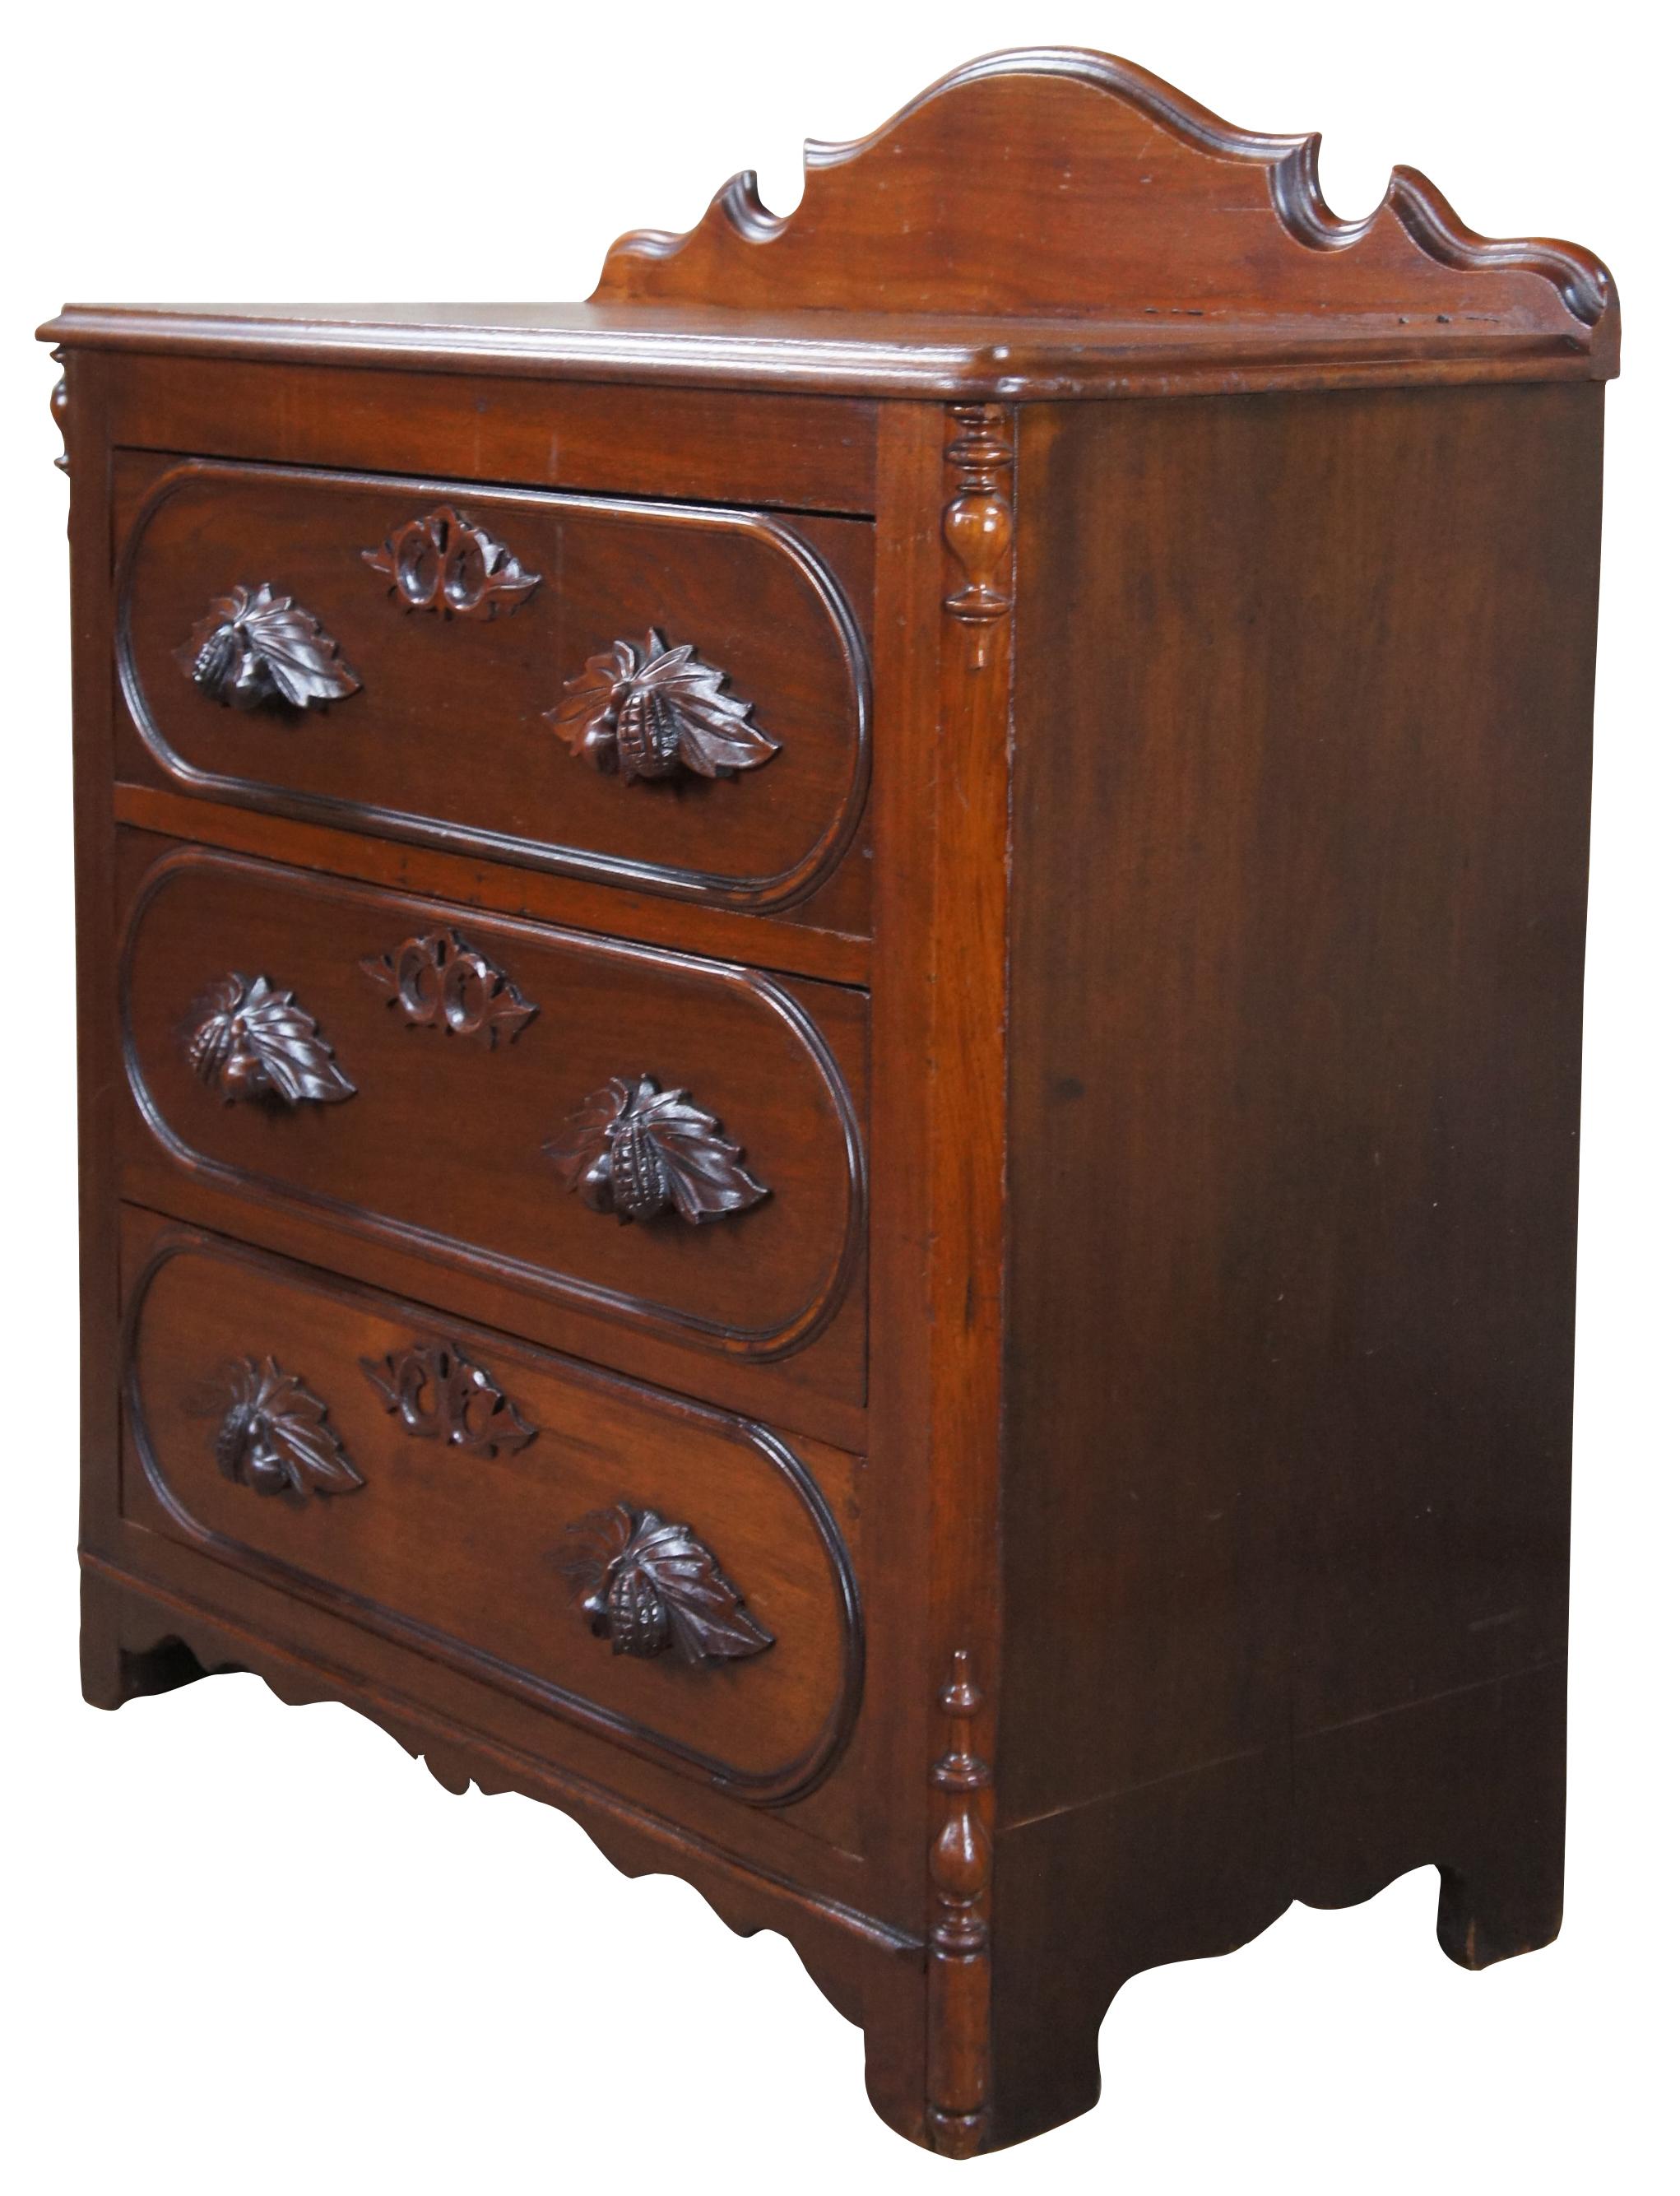 Antique Victorian chest or three drawer dresser / side table / nightstand.  Made of walnut featuring serpentine backsplash with carved high relief fruit nut & berry design.

30